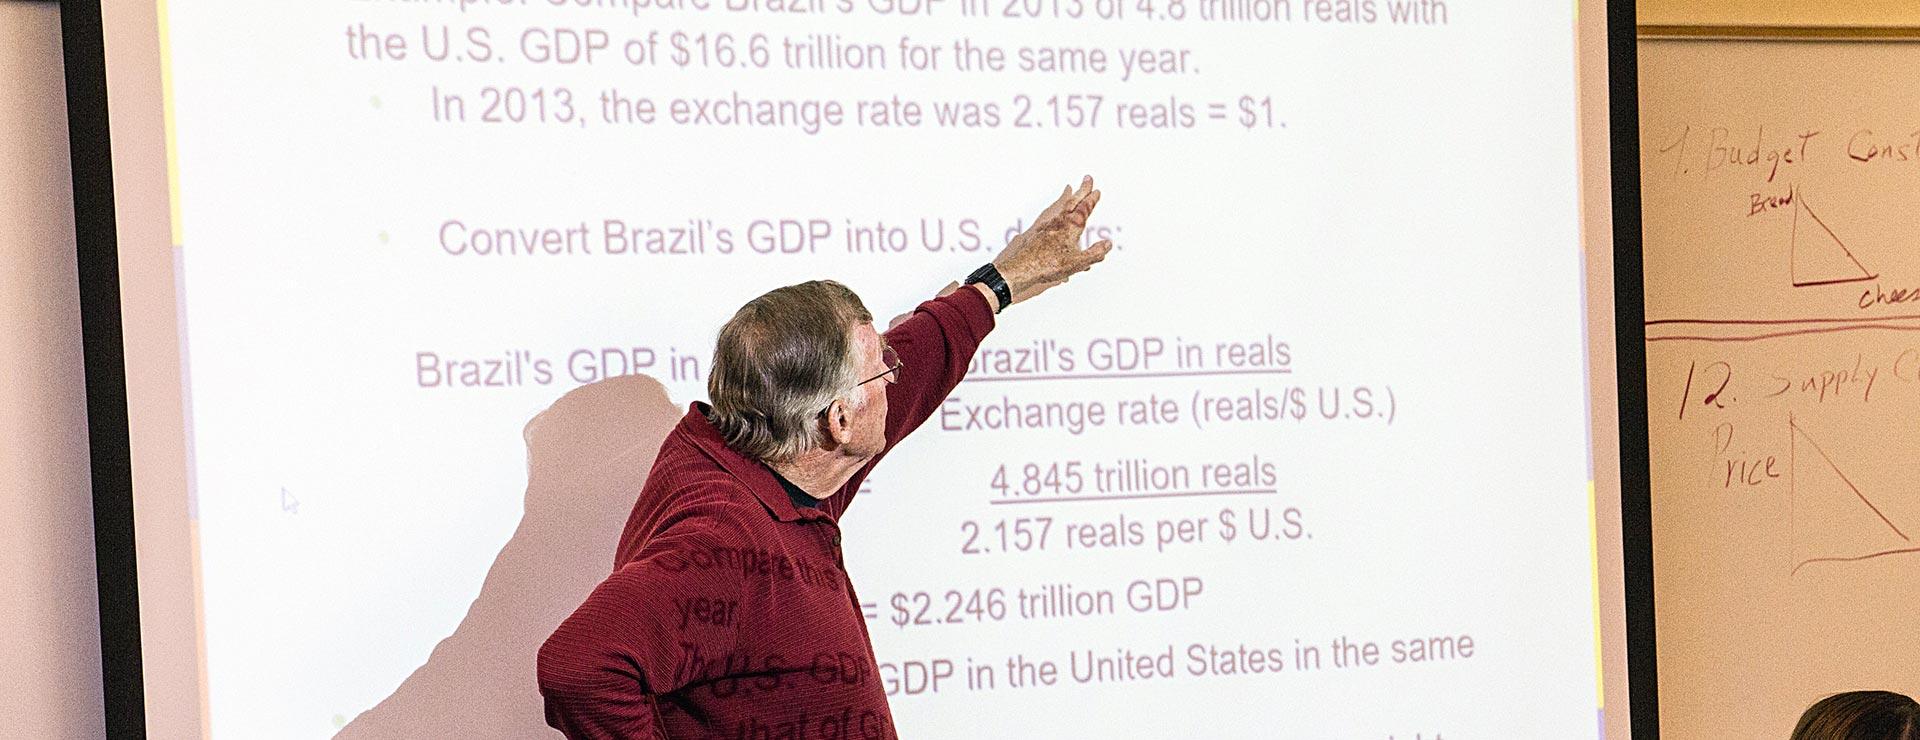 Economic instructor explaining how to convert international gross domestic product (GDP) into US dollars